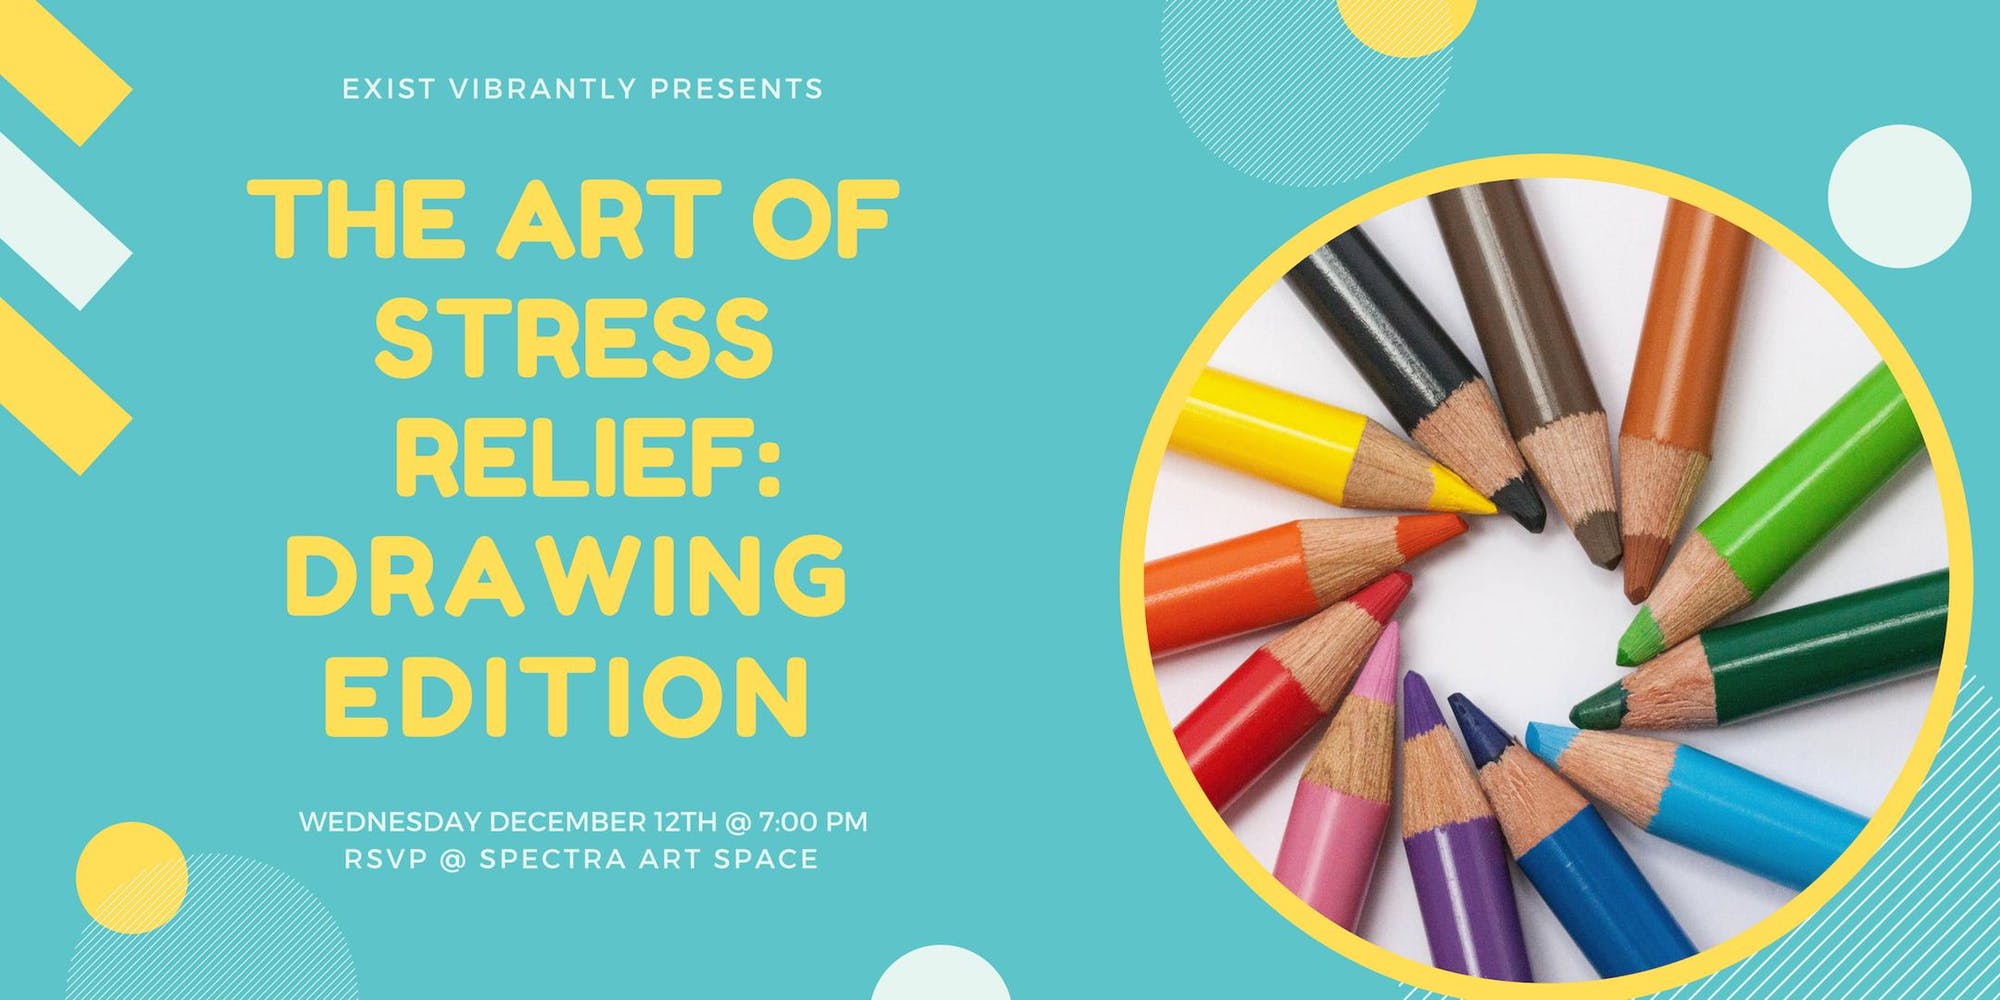 Art of Stress Relief: Workshops with Exist Vibrantly